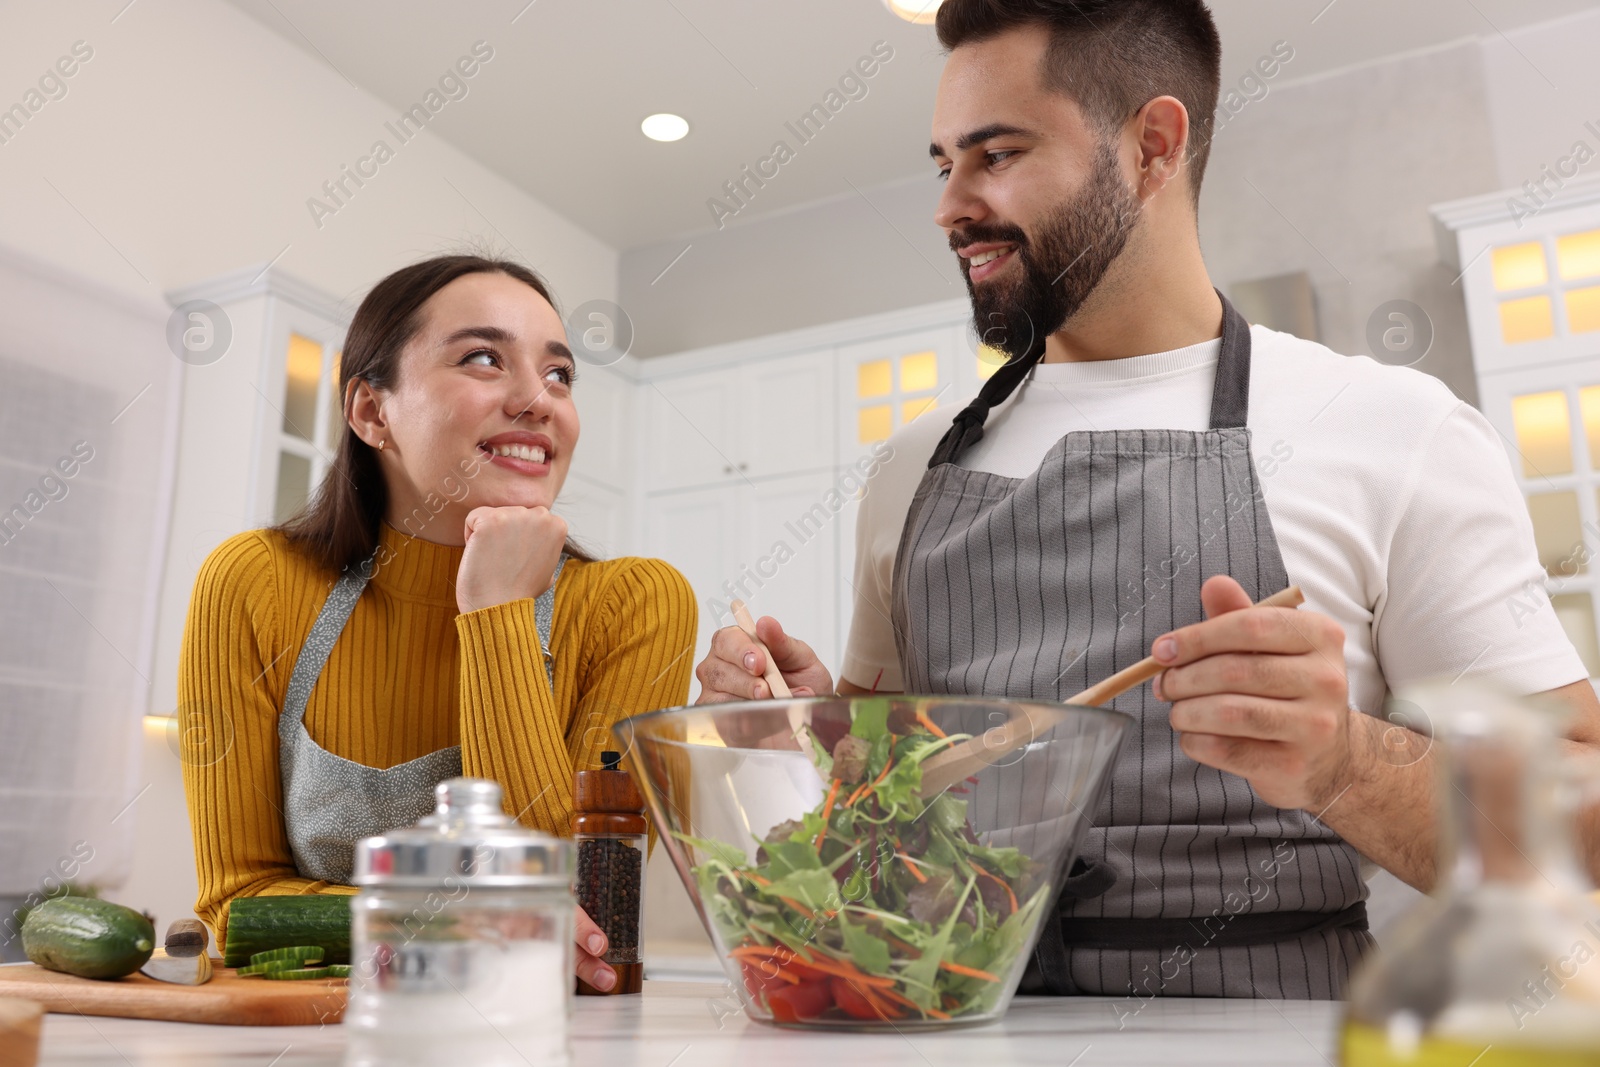 Photo of Lovely couple cooking together in kitchen, low angle view